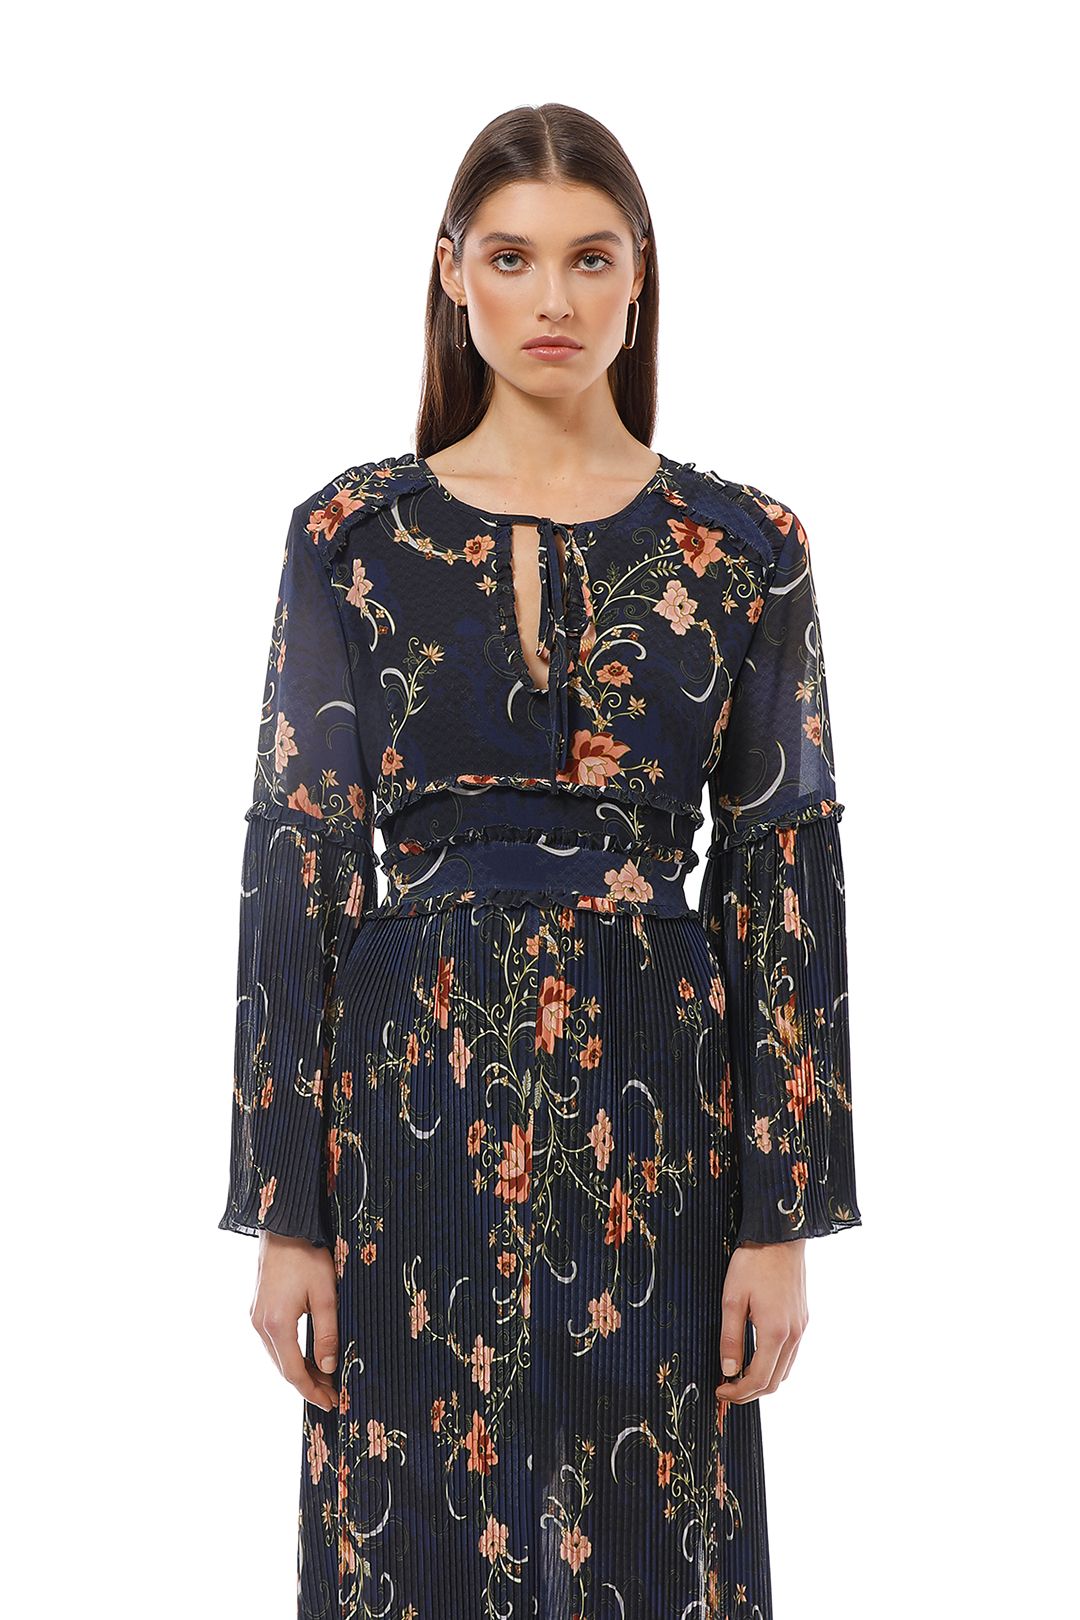 We Are Kindred - Adele Pleated Maxi Dress - Navy Floral - Close Up